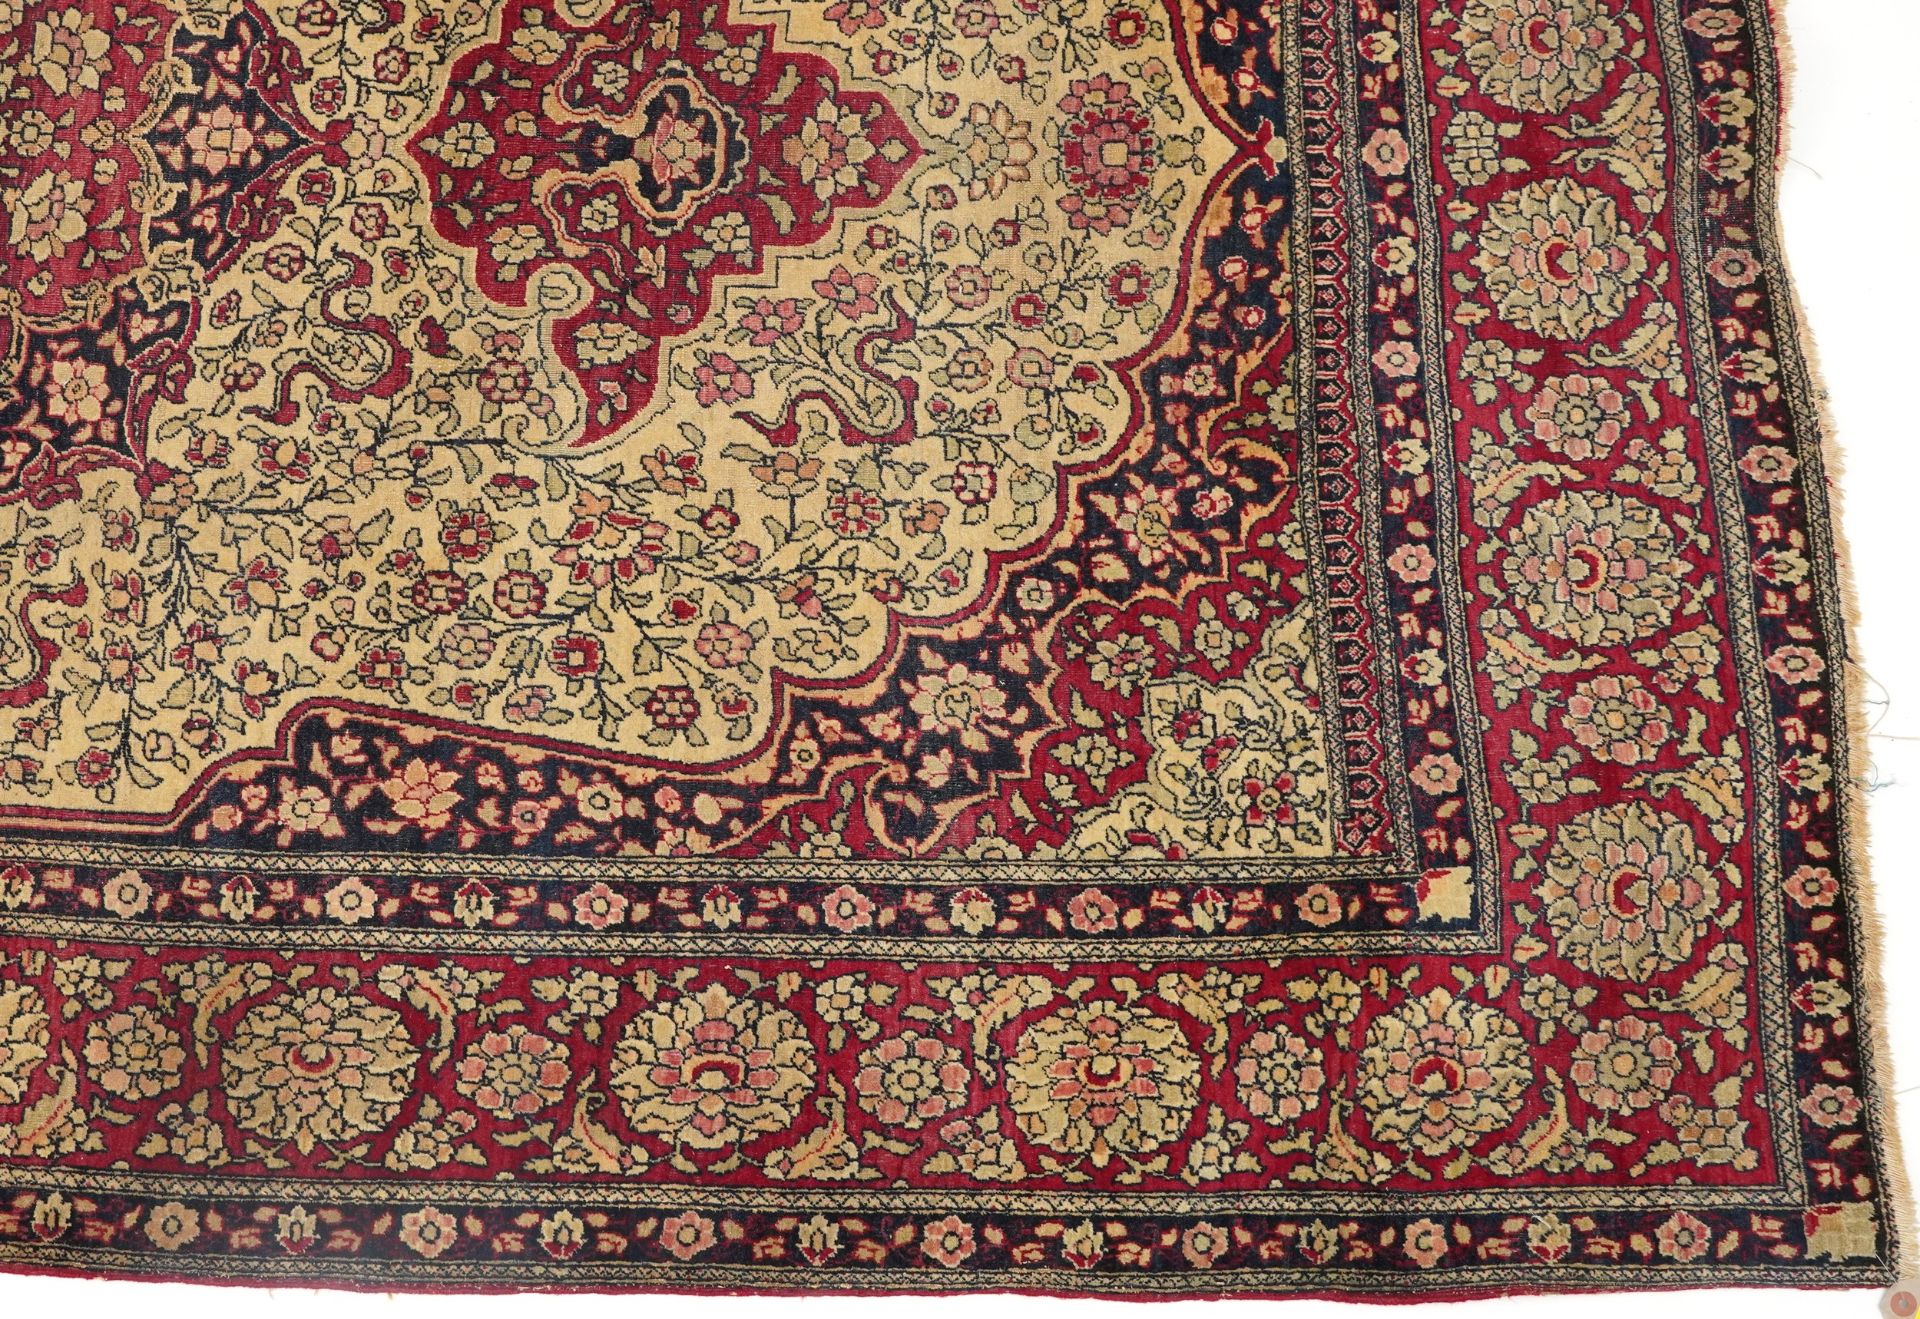 Rectangular Persian red ground rug having and allover repeat floral design, 227cm x 141cm - Image 5 of 6